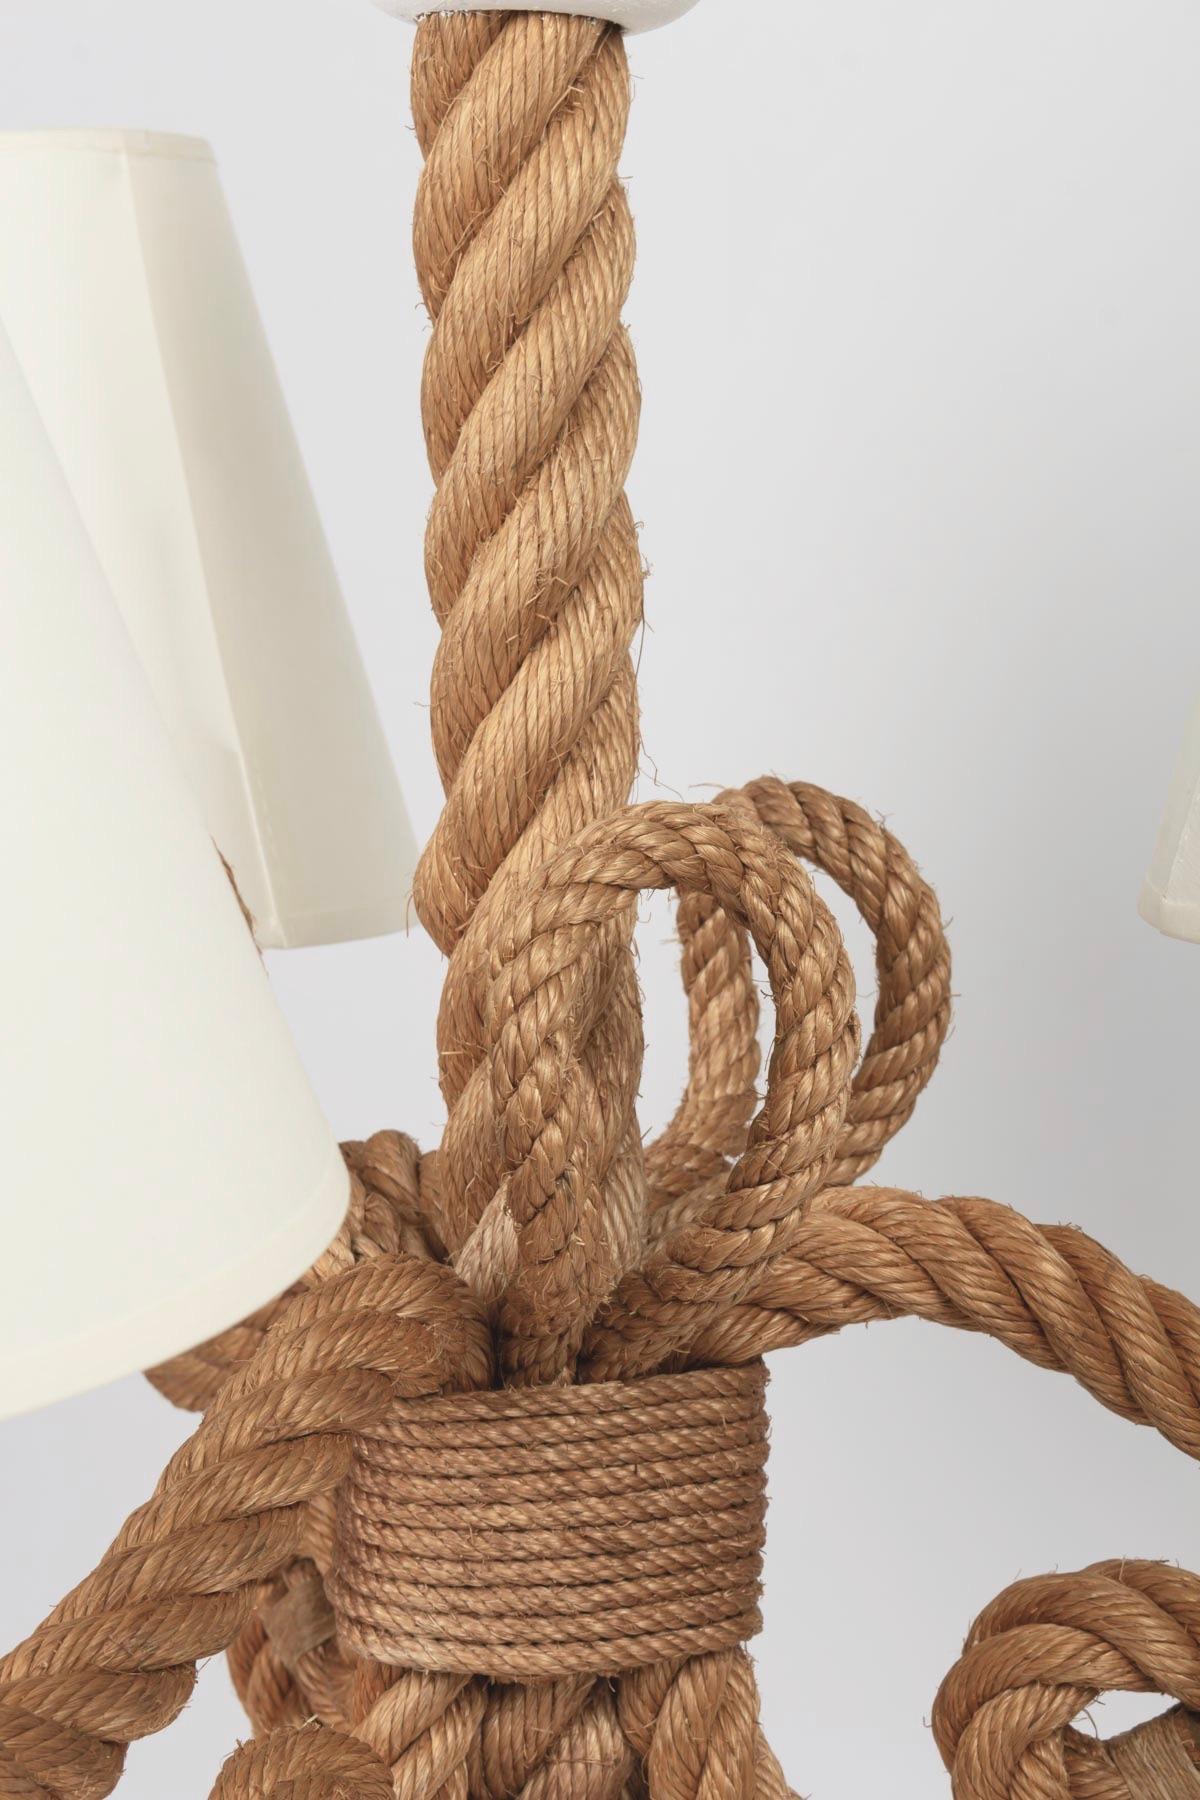 The chandelier is composed of three curved luminous arms in braided rope. These three arms meet on the lower part and form pretty curls.
Three shades of off-white cotton matched to the originals.

Adrien Audoux and Frida Minet are known for their